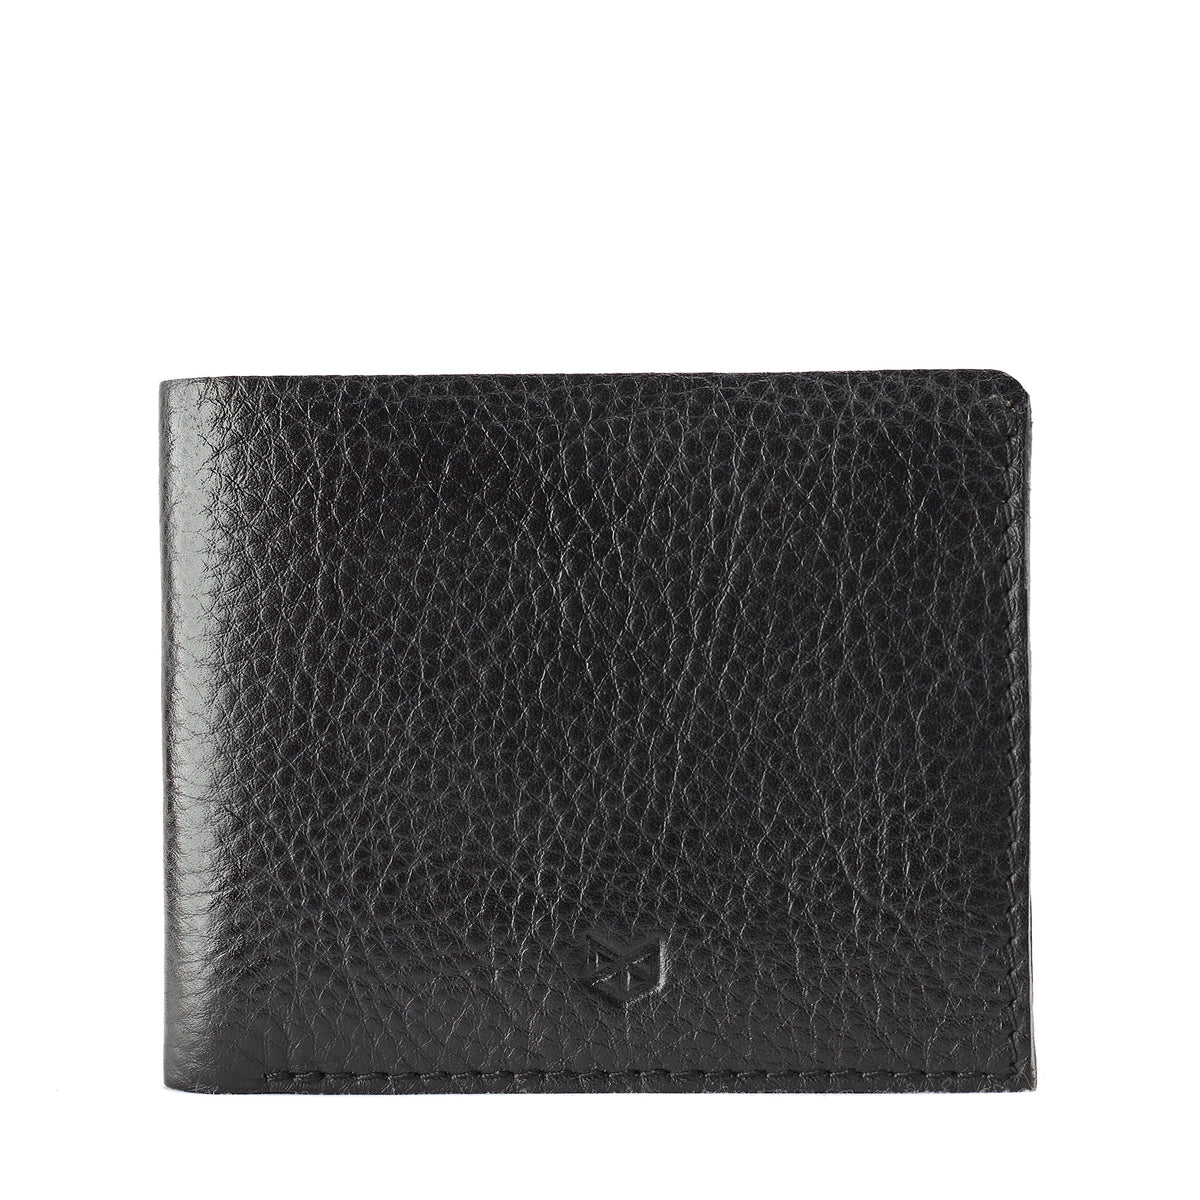 Handmade Leather Slim Wallet by Capra Leather